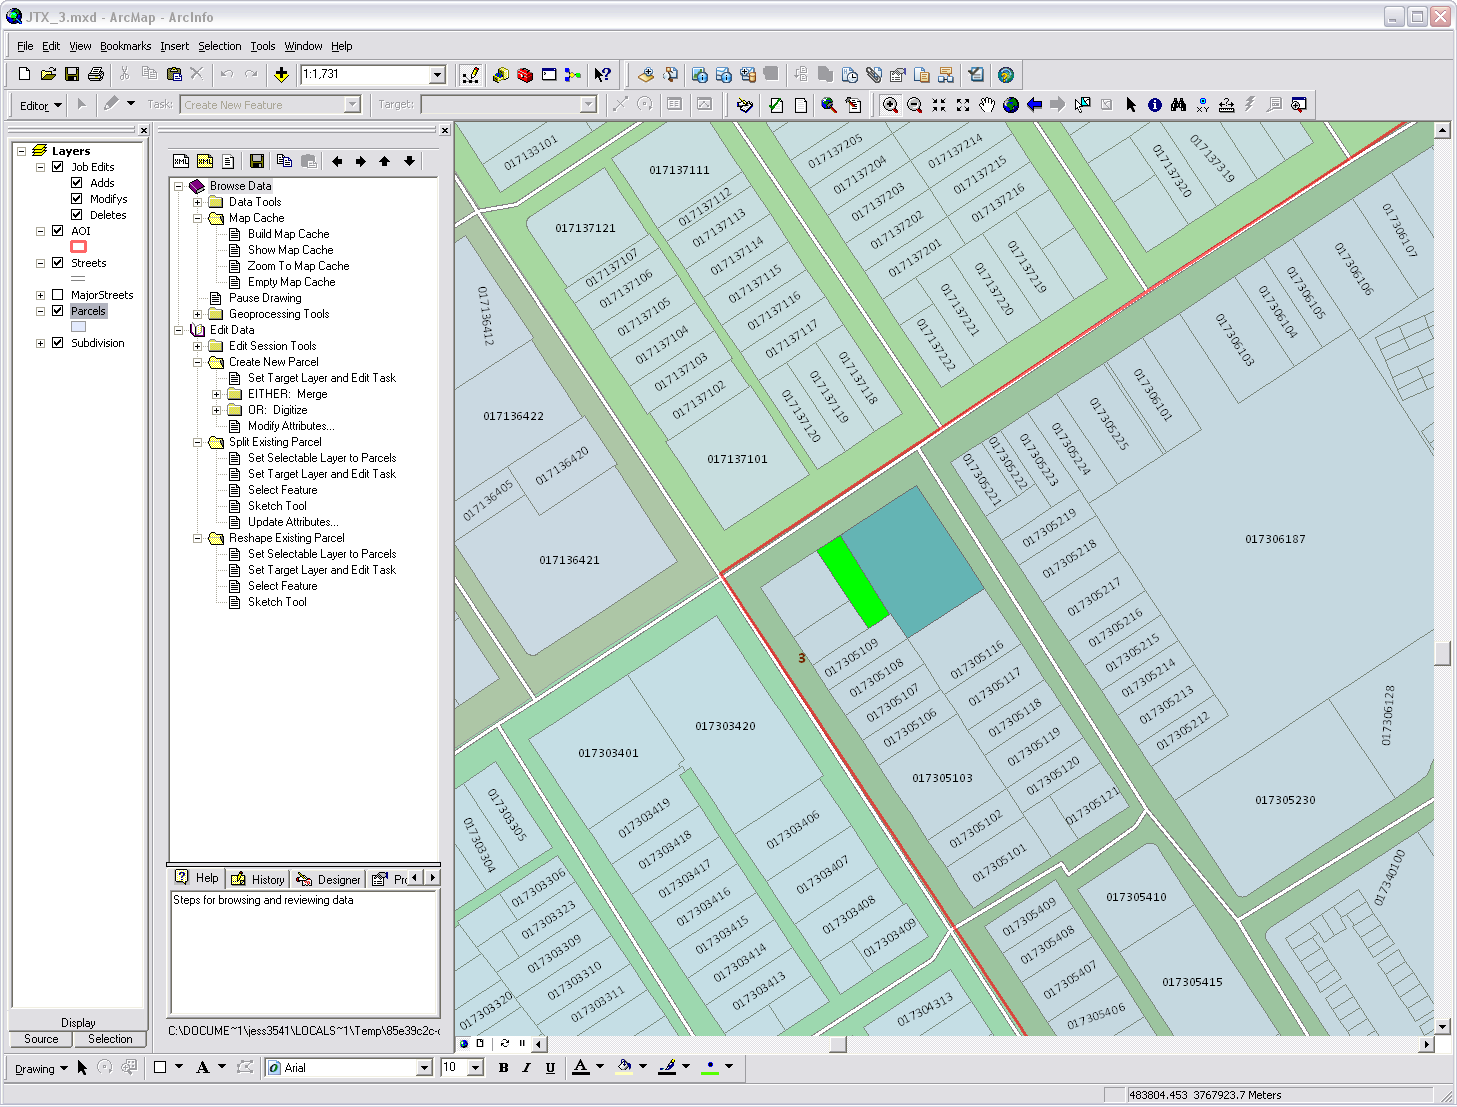 ArcGIS Workflow Manager Classic in ArcMap